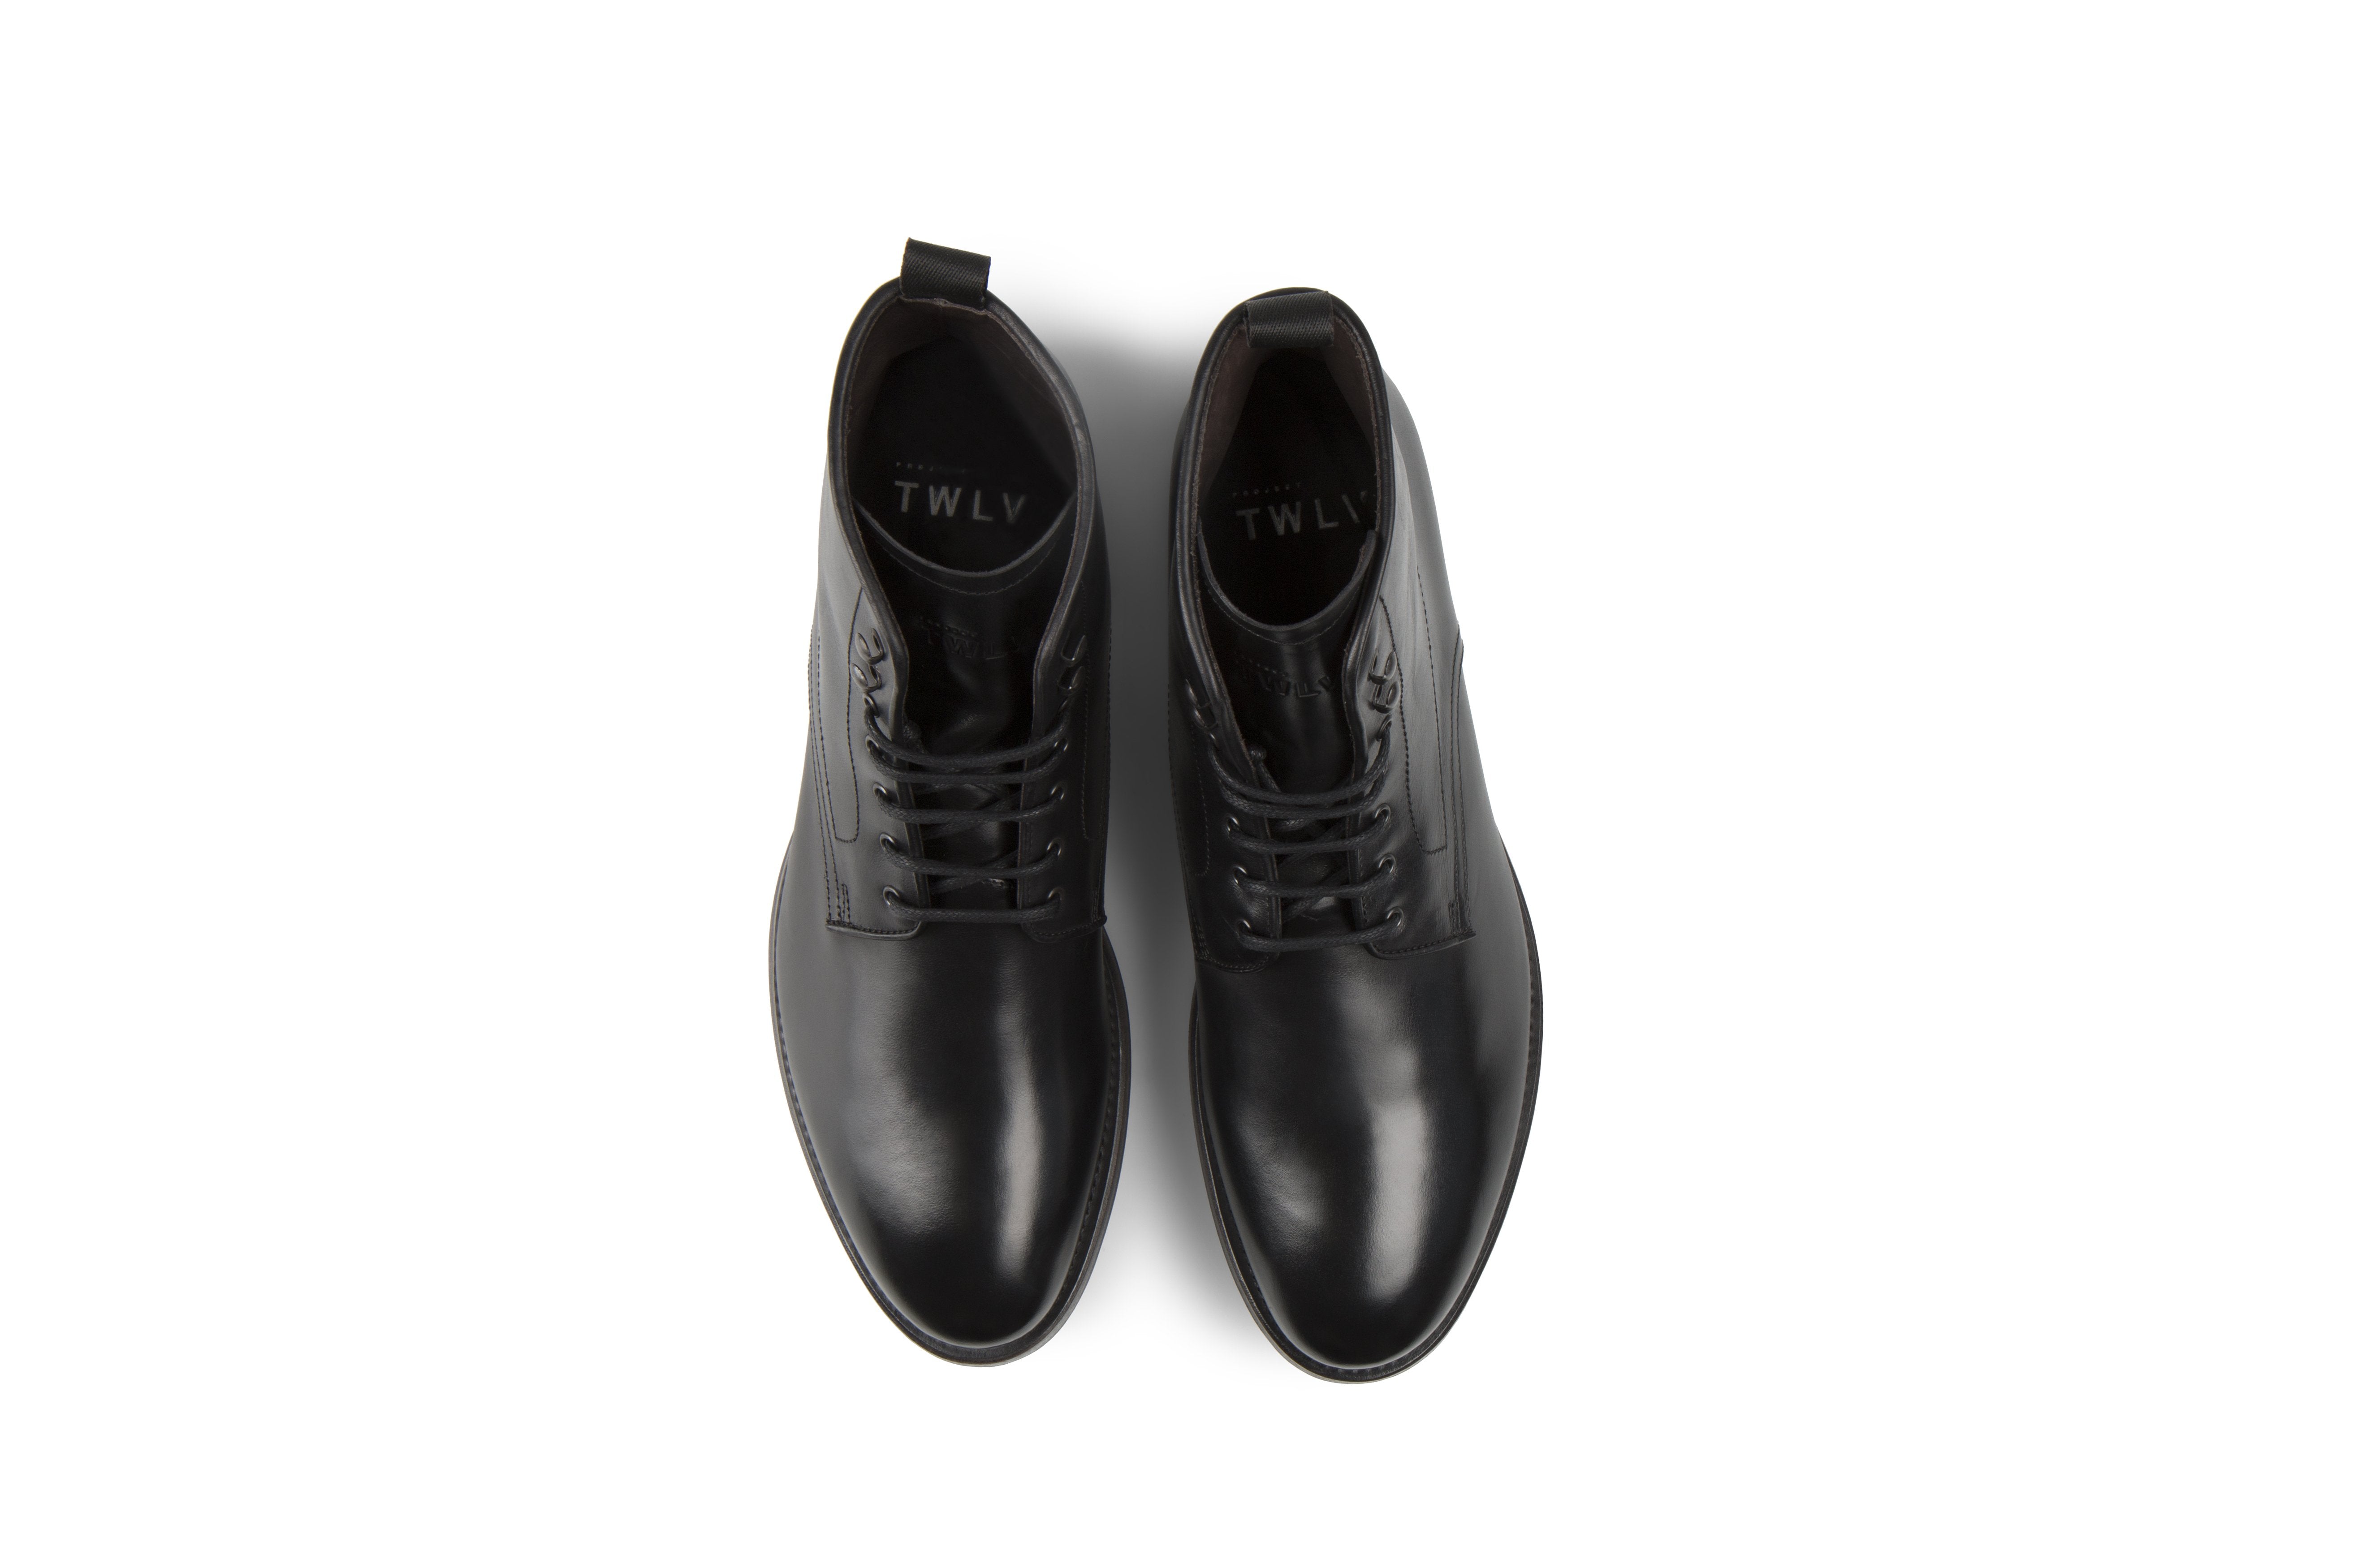 Cult Black Cordovan Leather Balmoral Boots